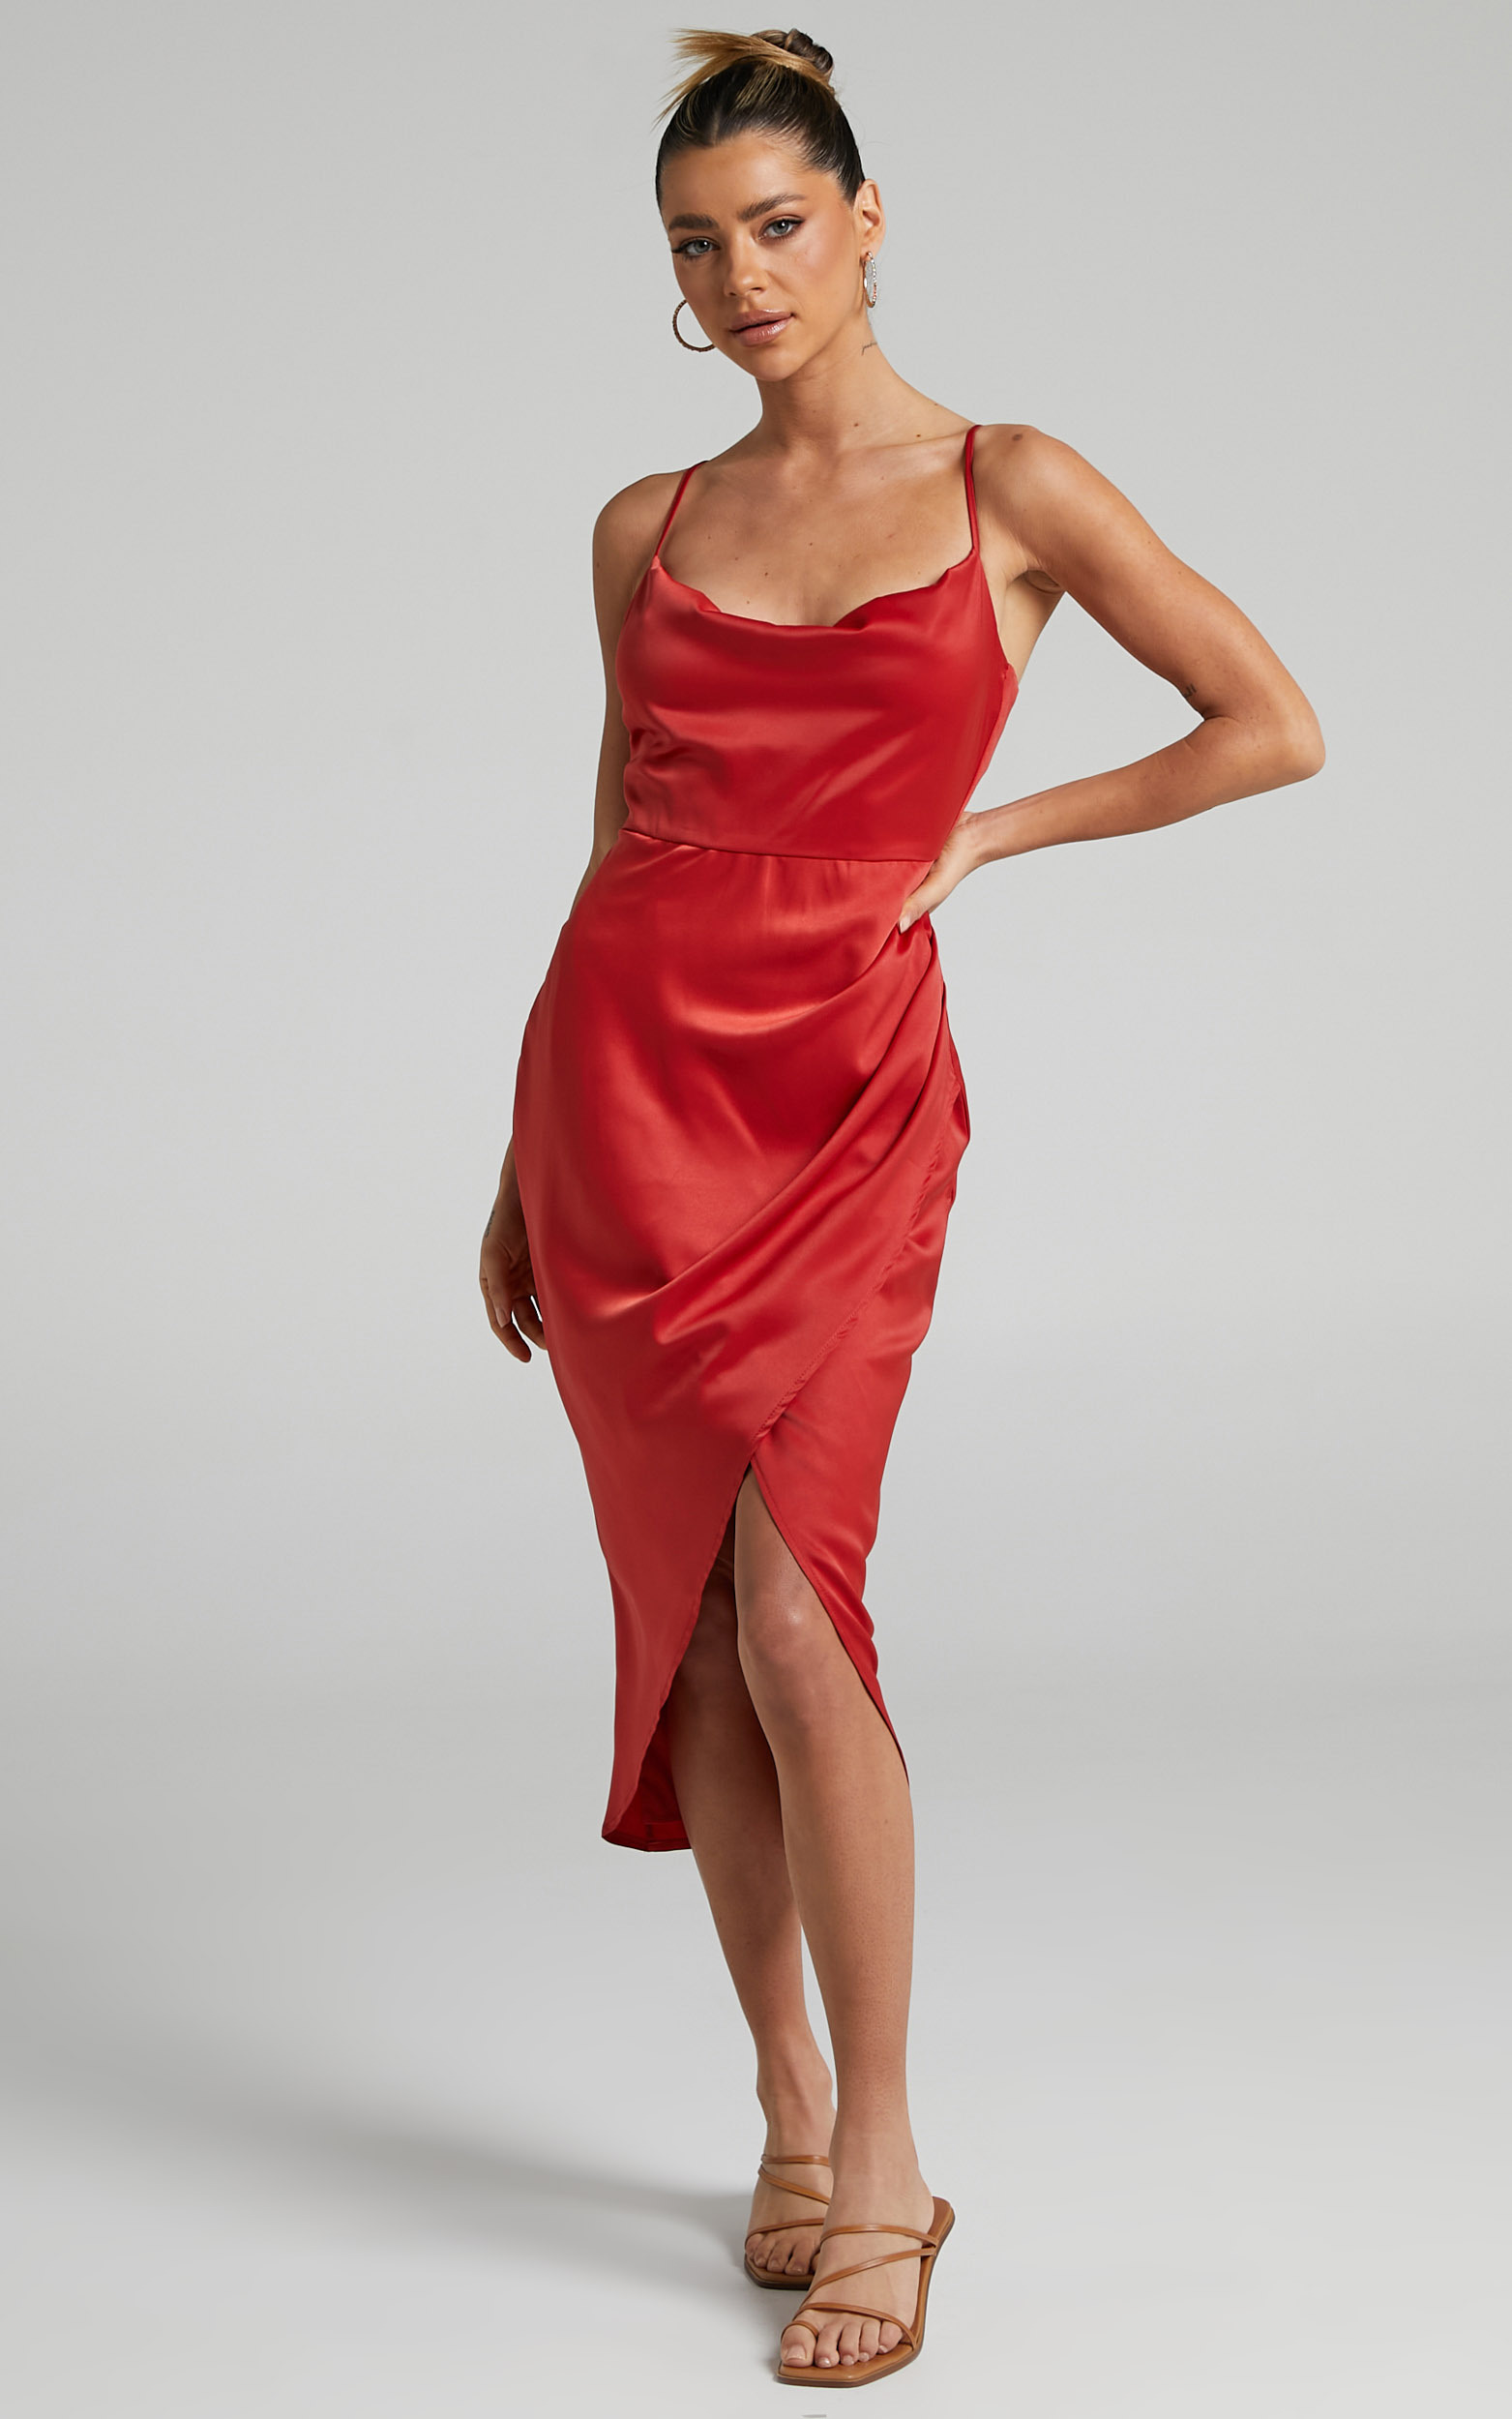 Dazzling Lights Dress in Red - 06, RED3, hi-res image number null